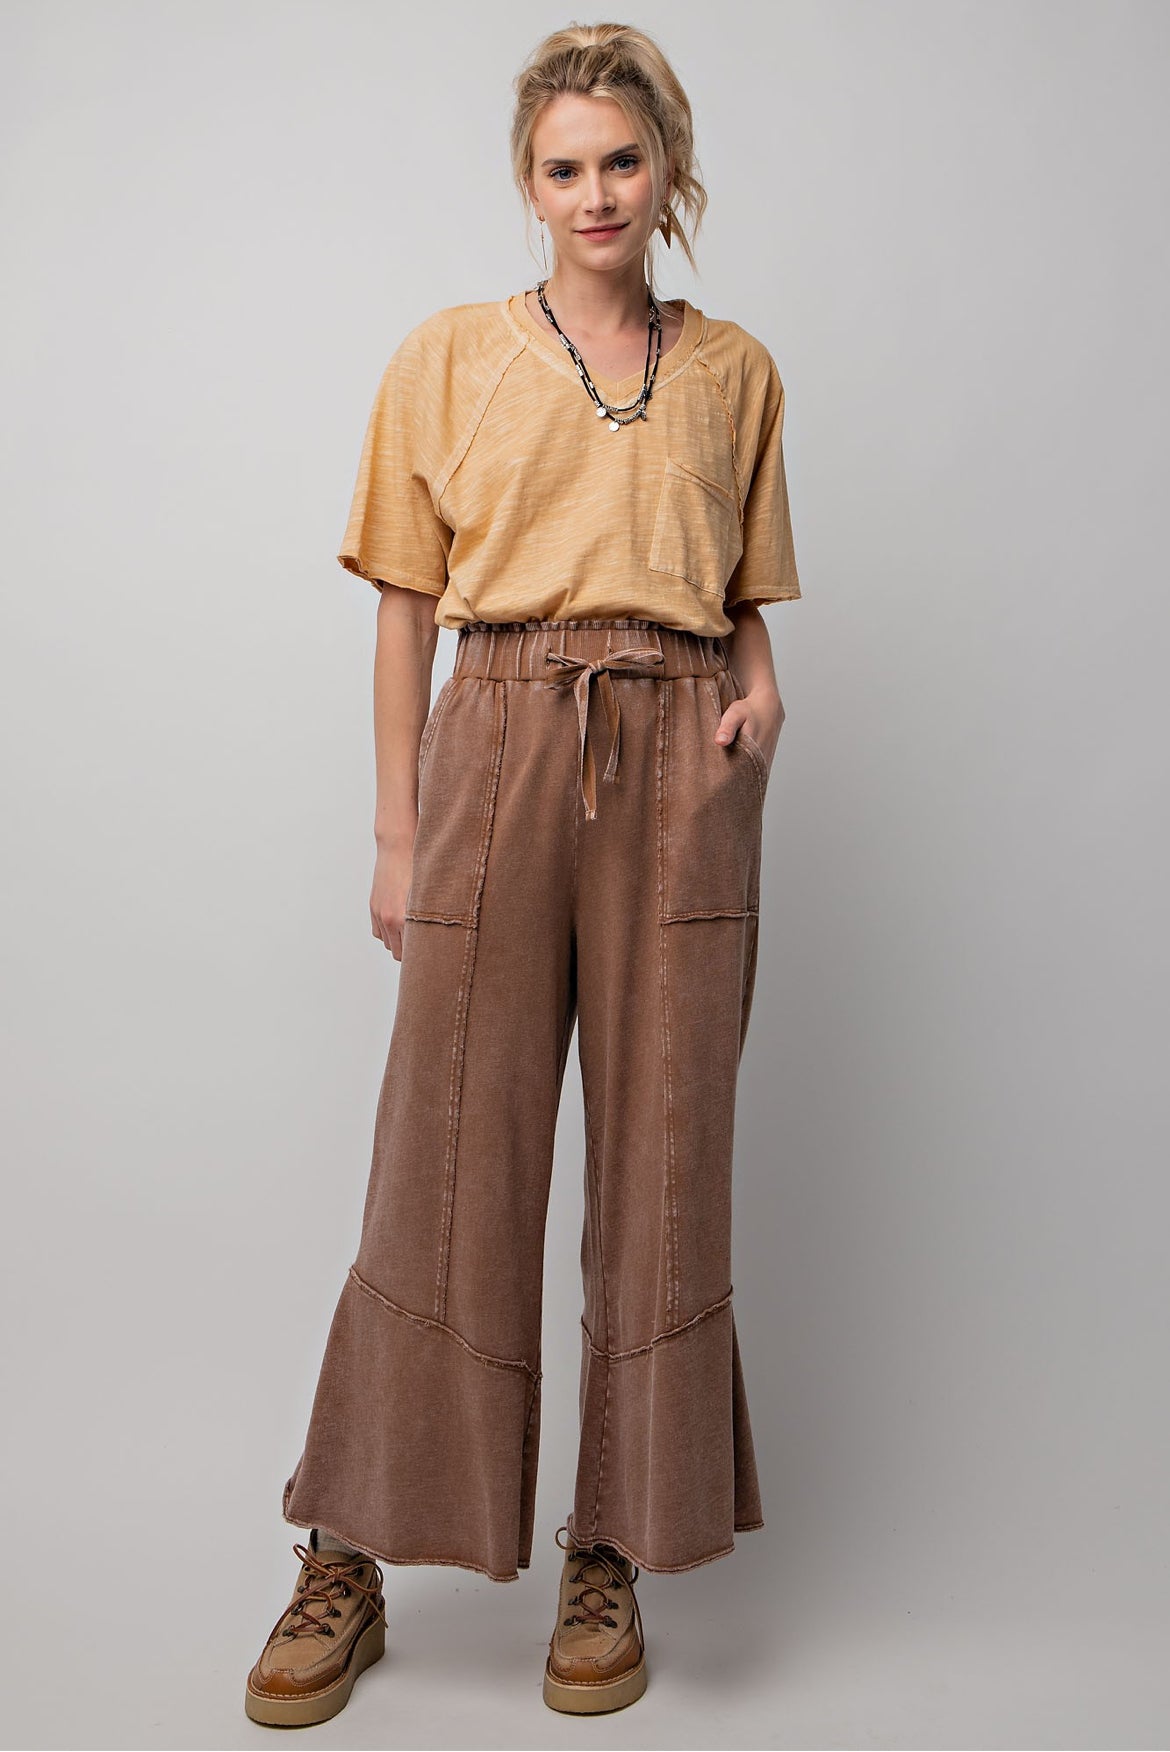 Coco Mineral Washed Wide Leg Sweats